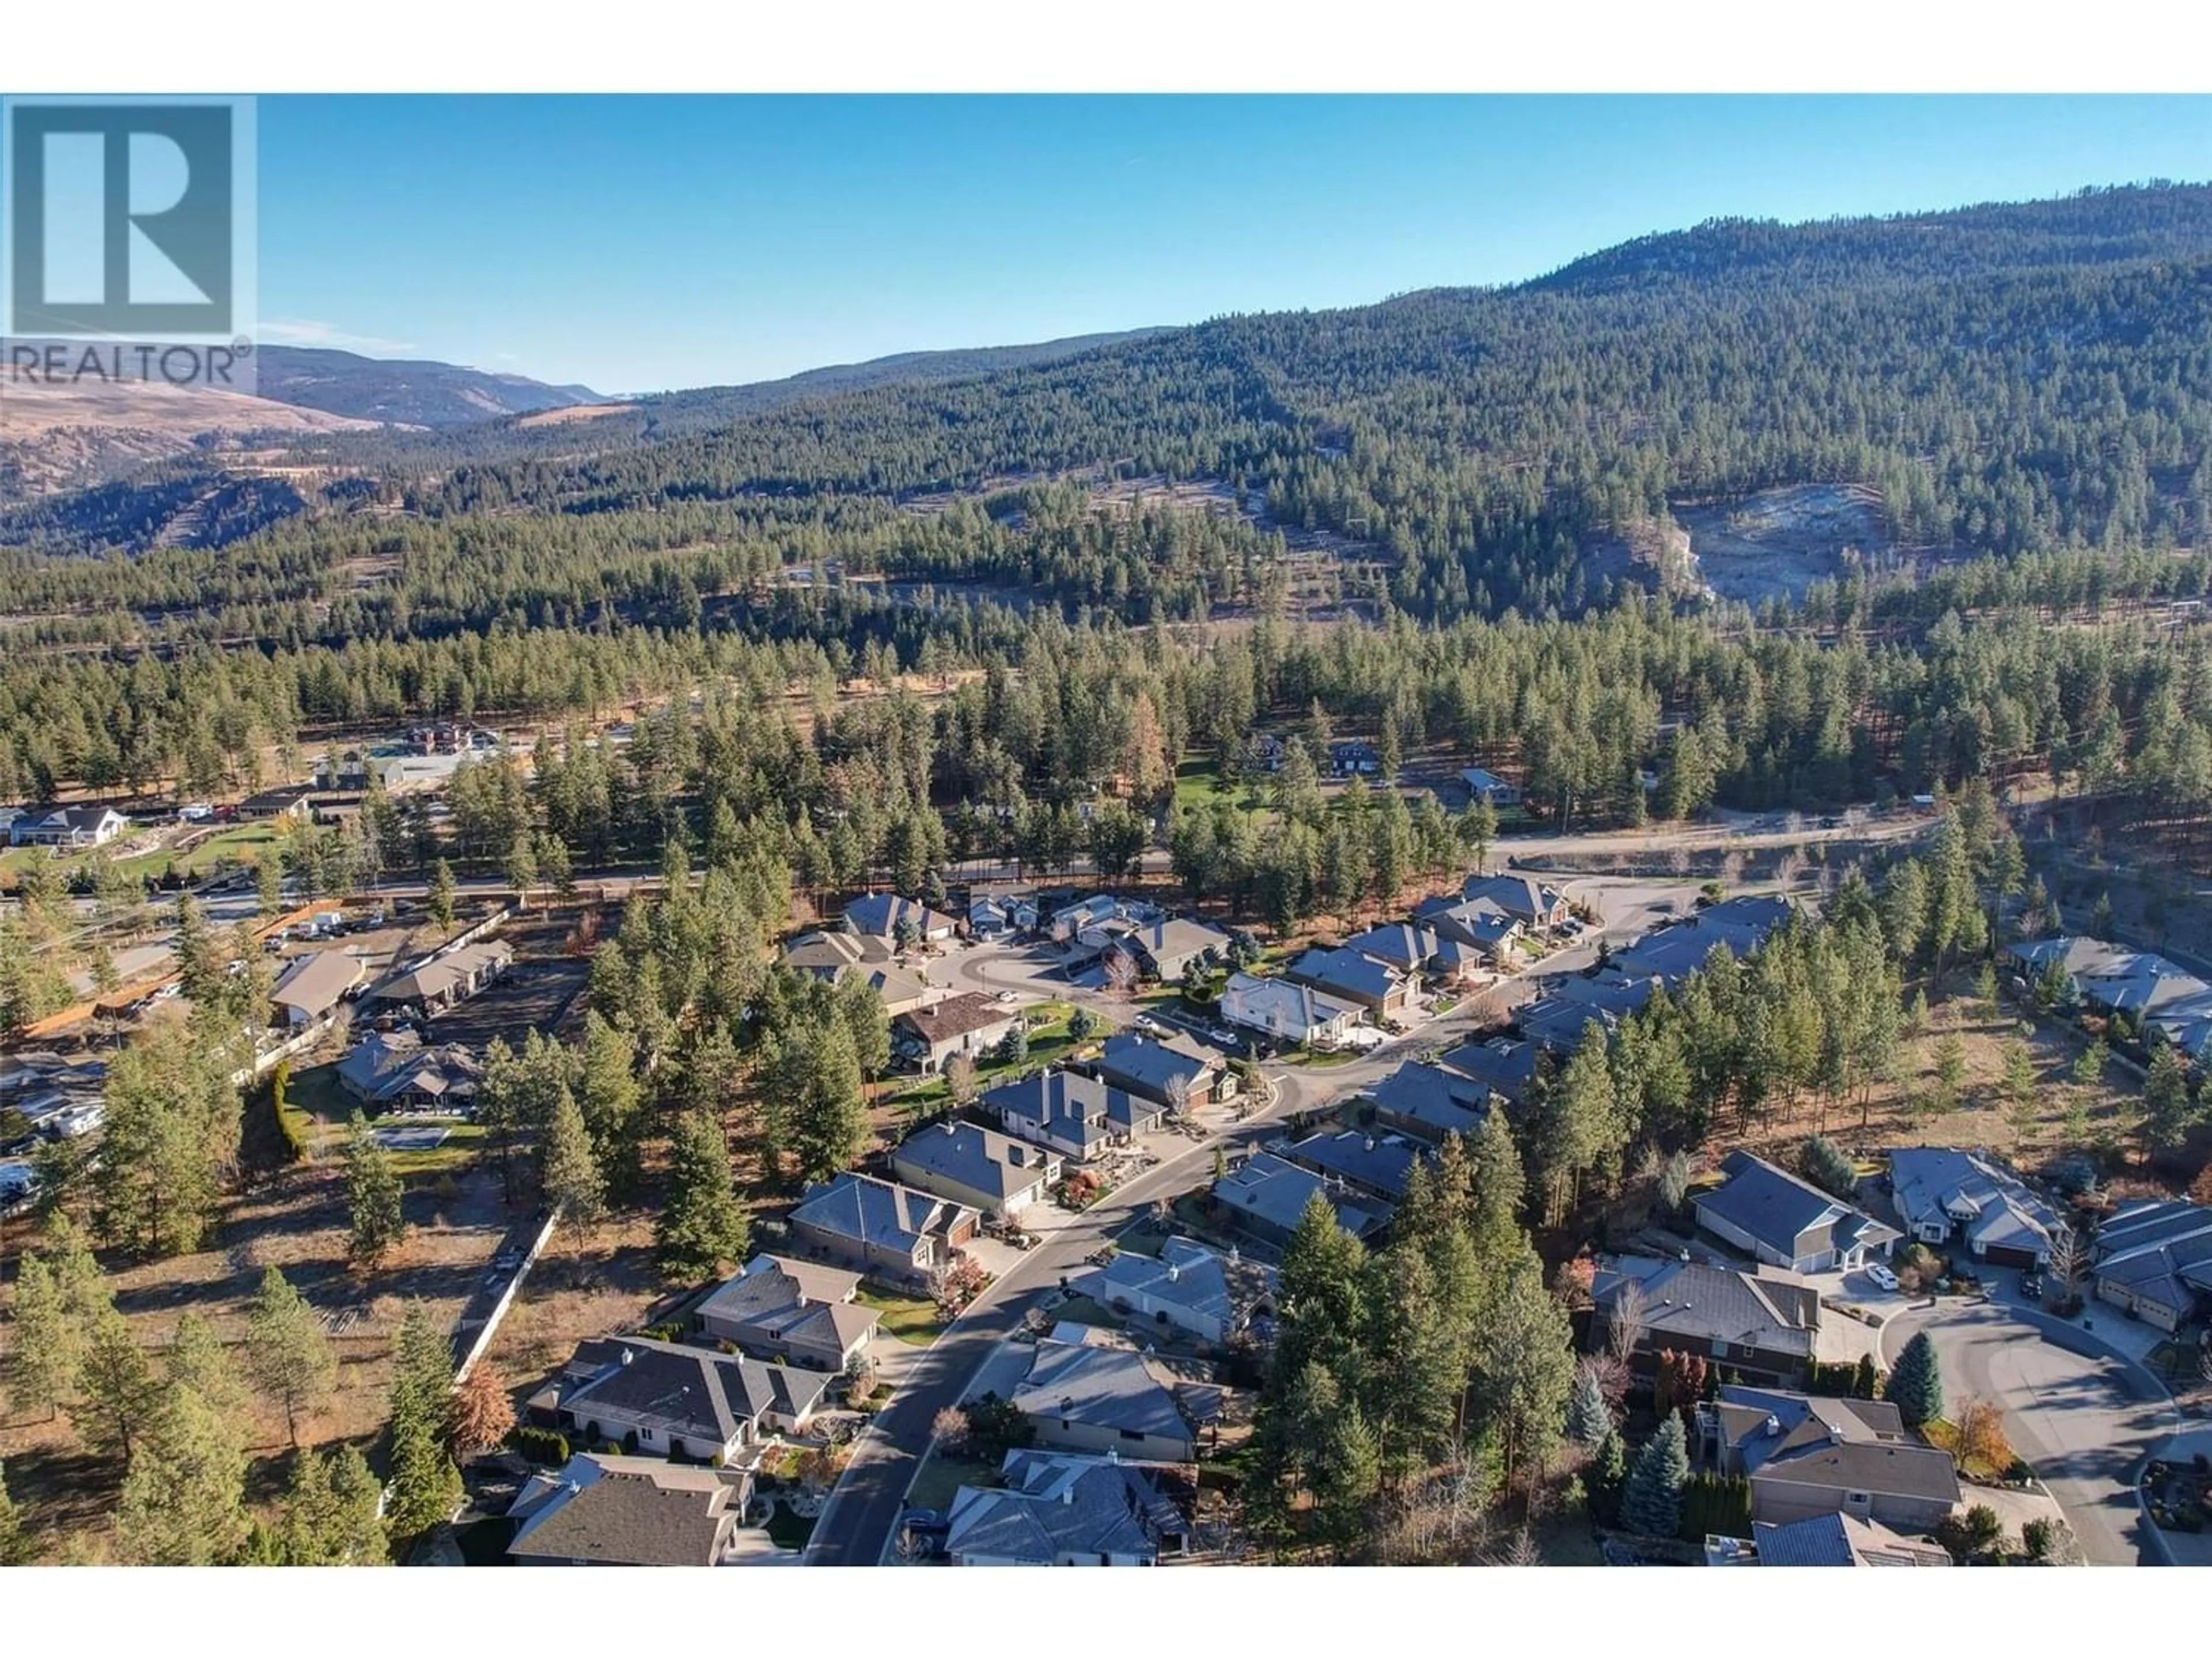 Lakeview for 4540 Gallaghers Edgewood Drive, Kelowna British Columbia V1W5E6